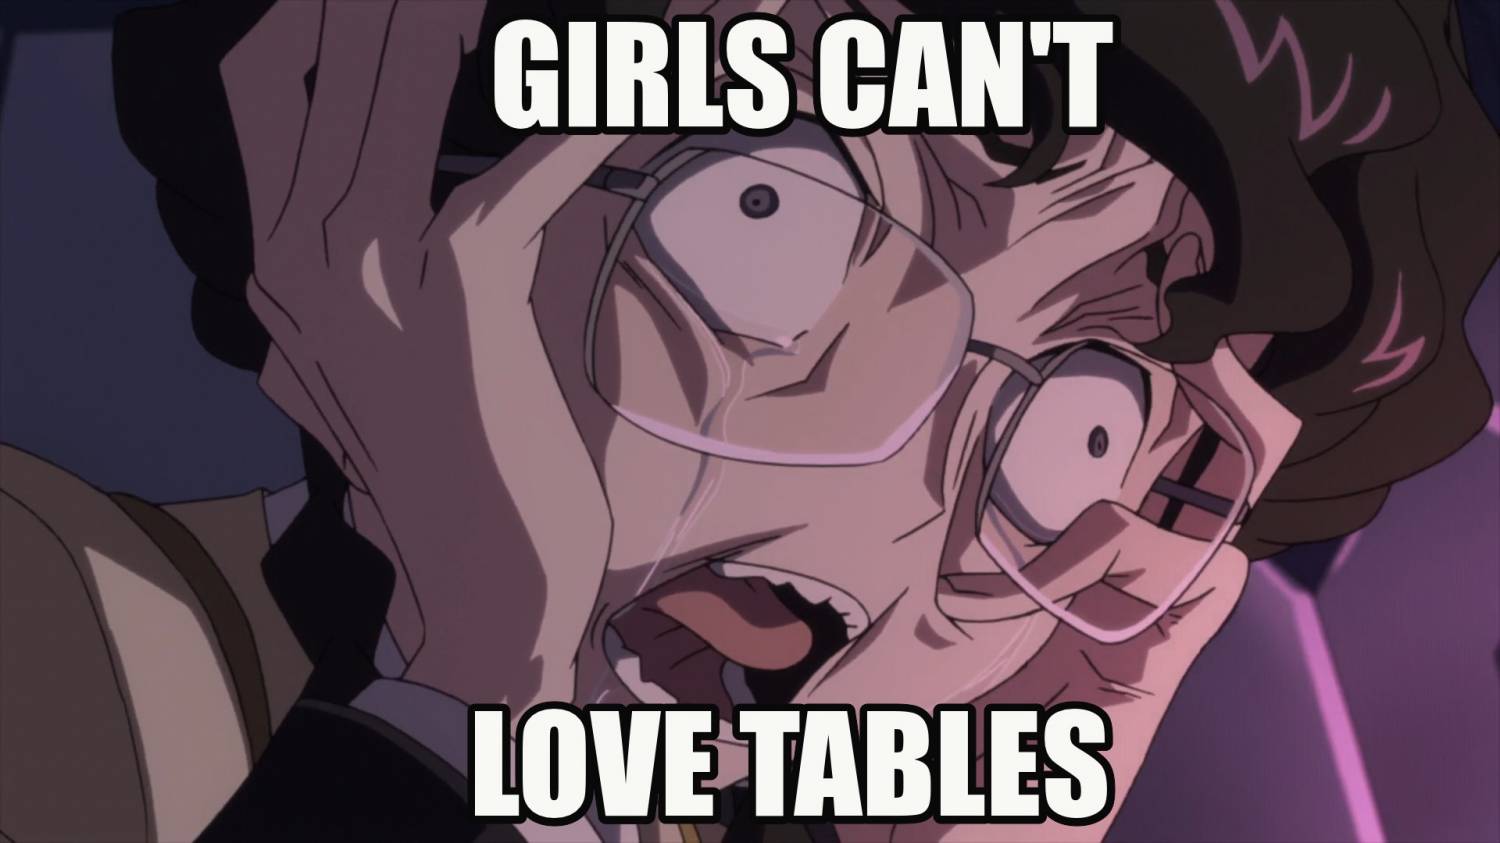 Meme Girls can't love tables